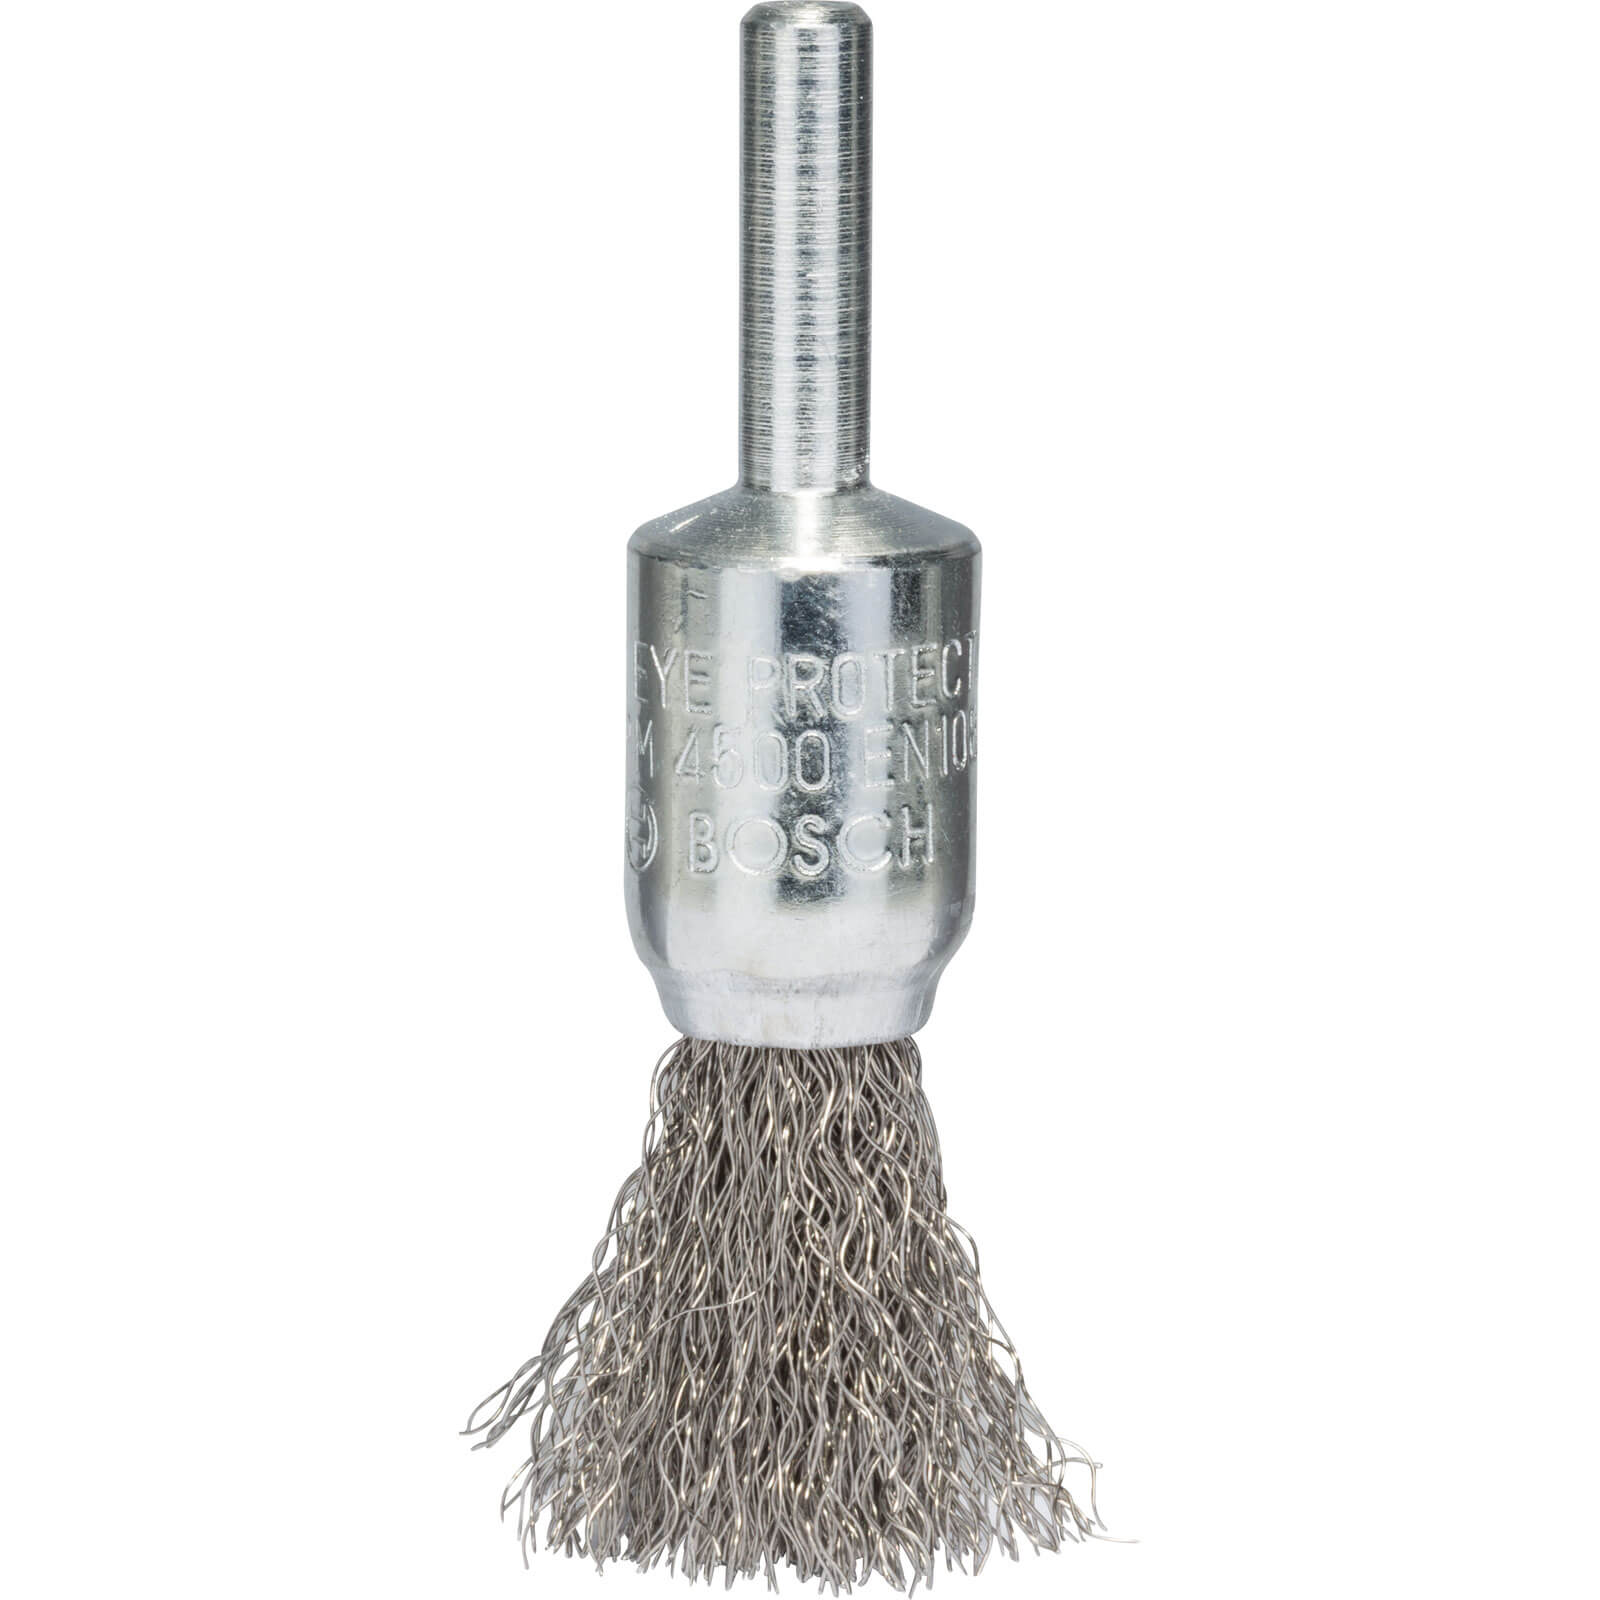 Image of Bosch 0.2mm Crimped Inox Steel Wire Pencil Brush 15mm 6mm Shank